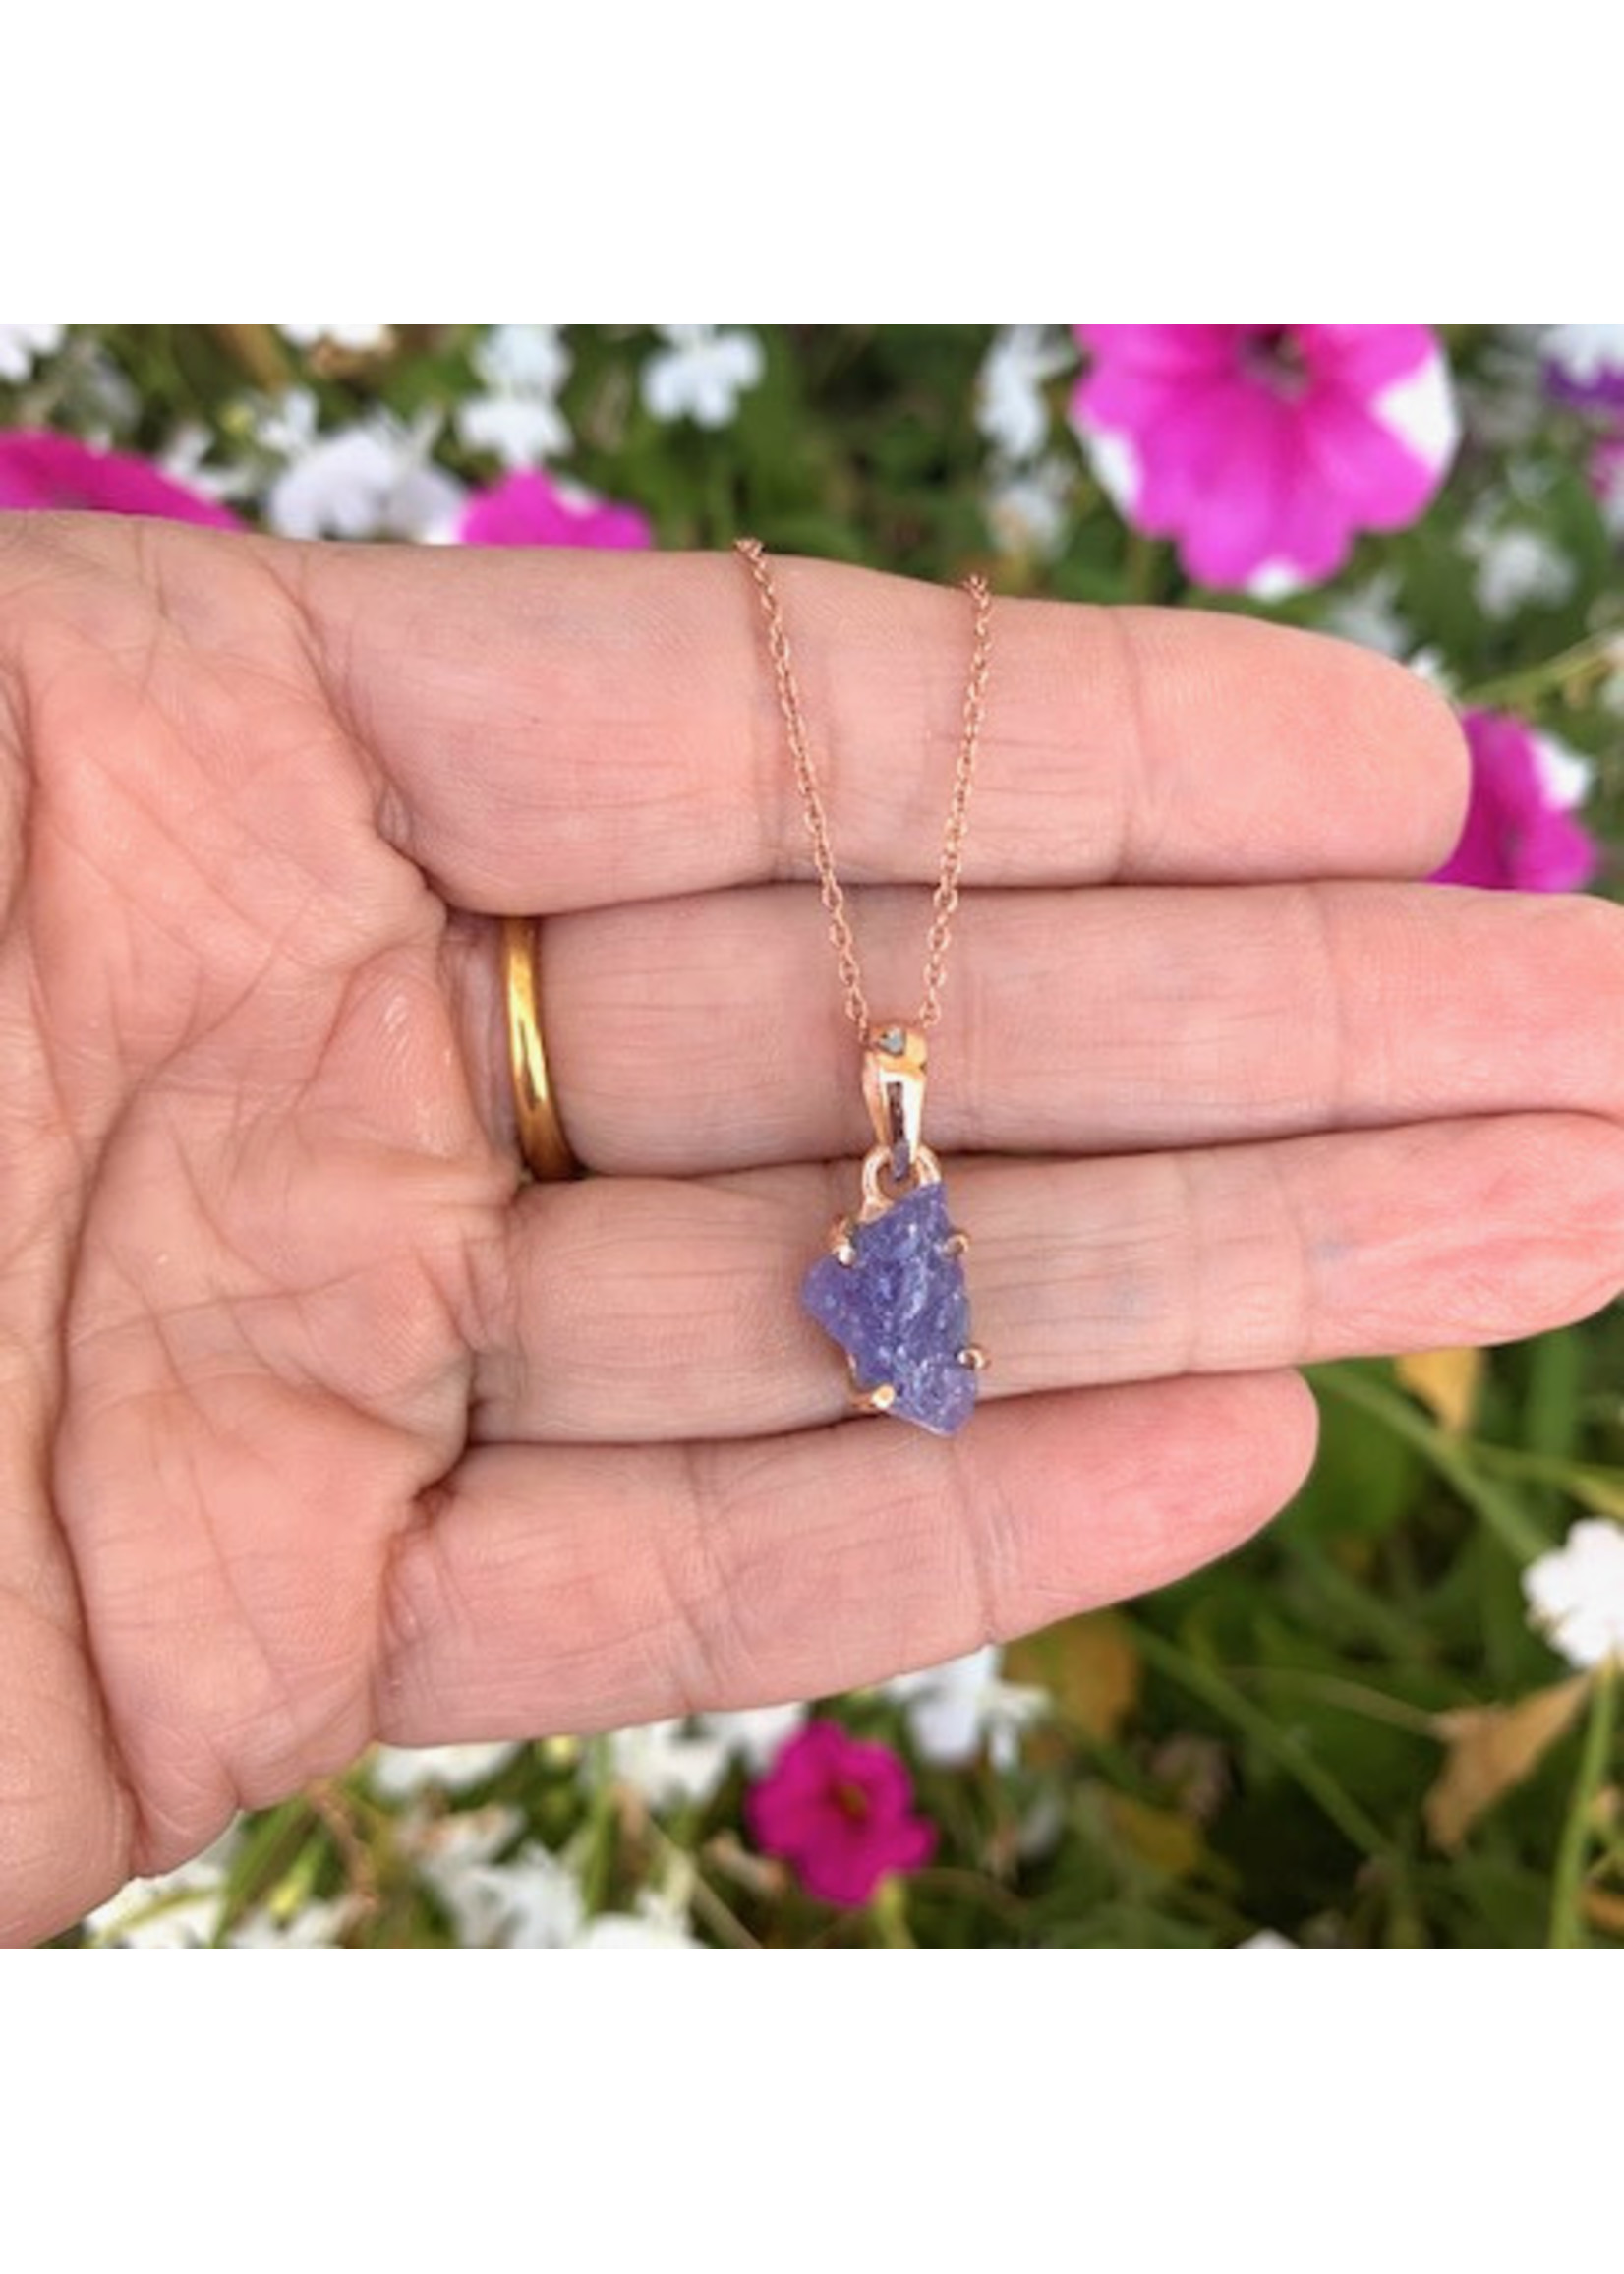 Tanzanite Pendant Rough Rose Gold for Violet Flame Activation